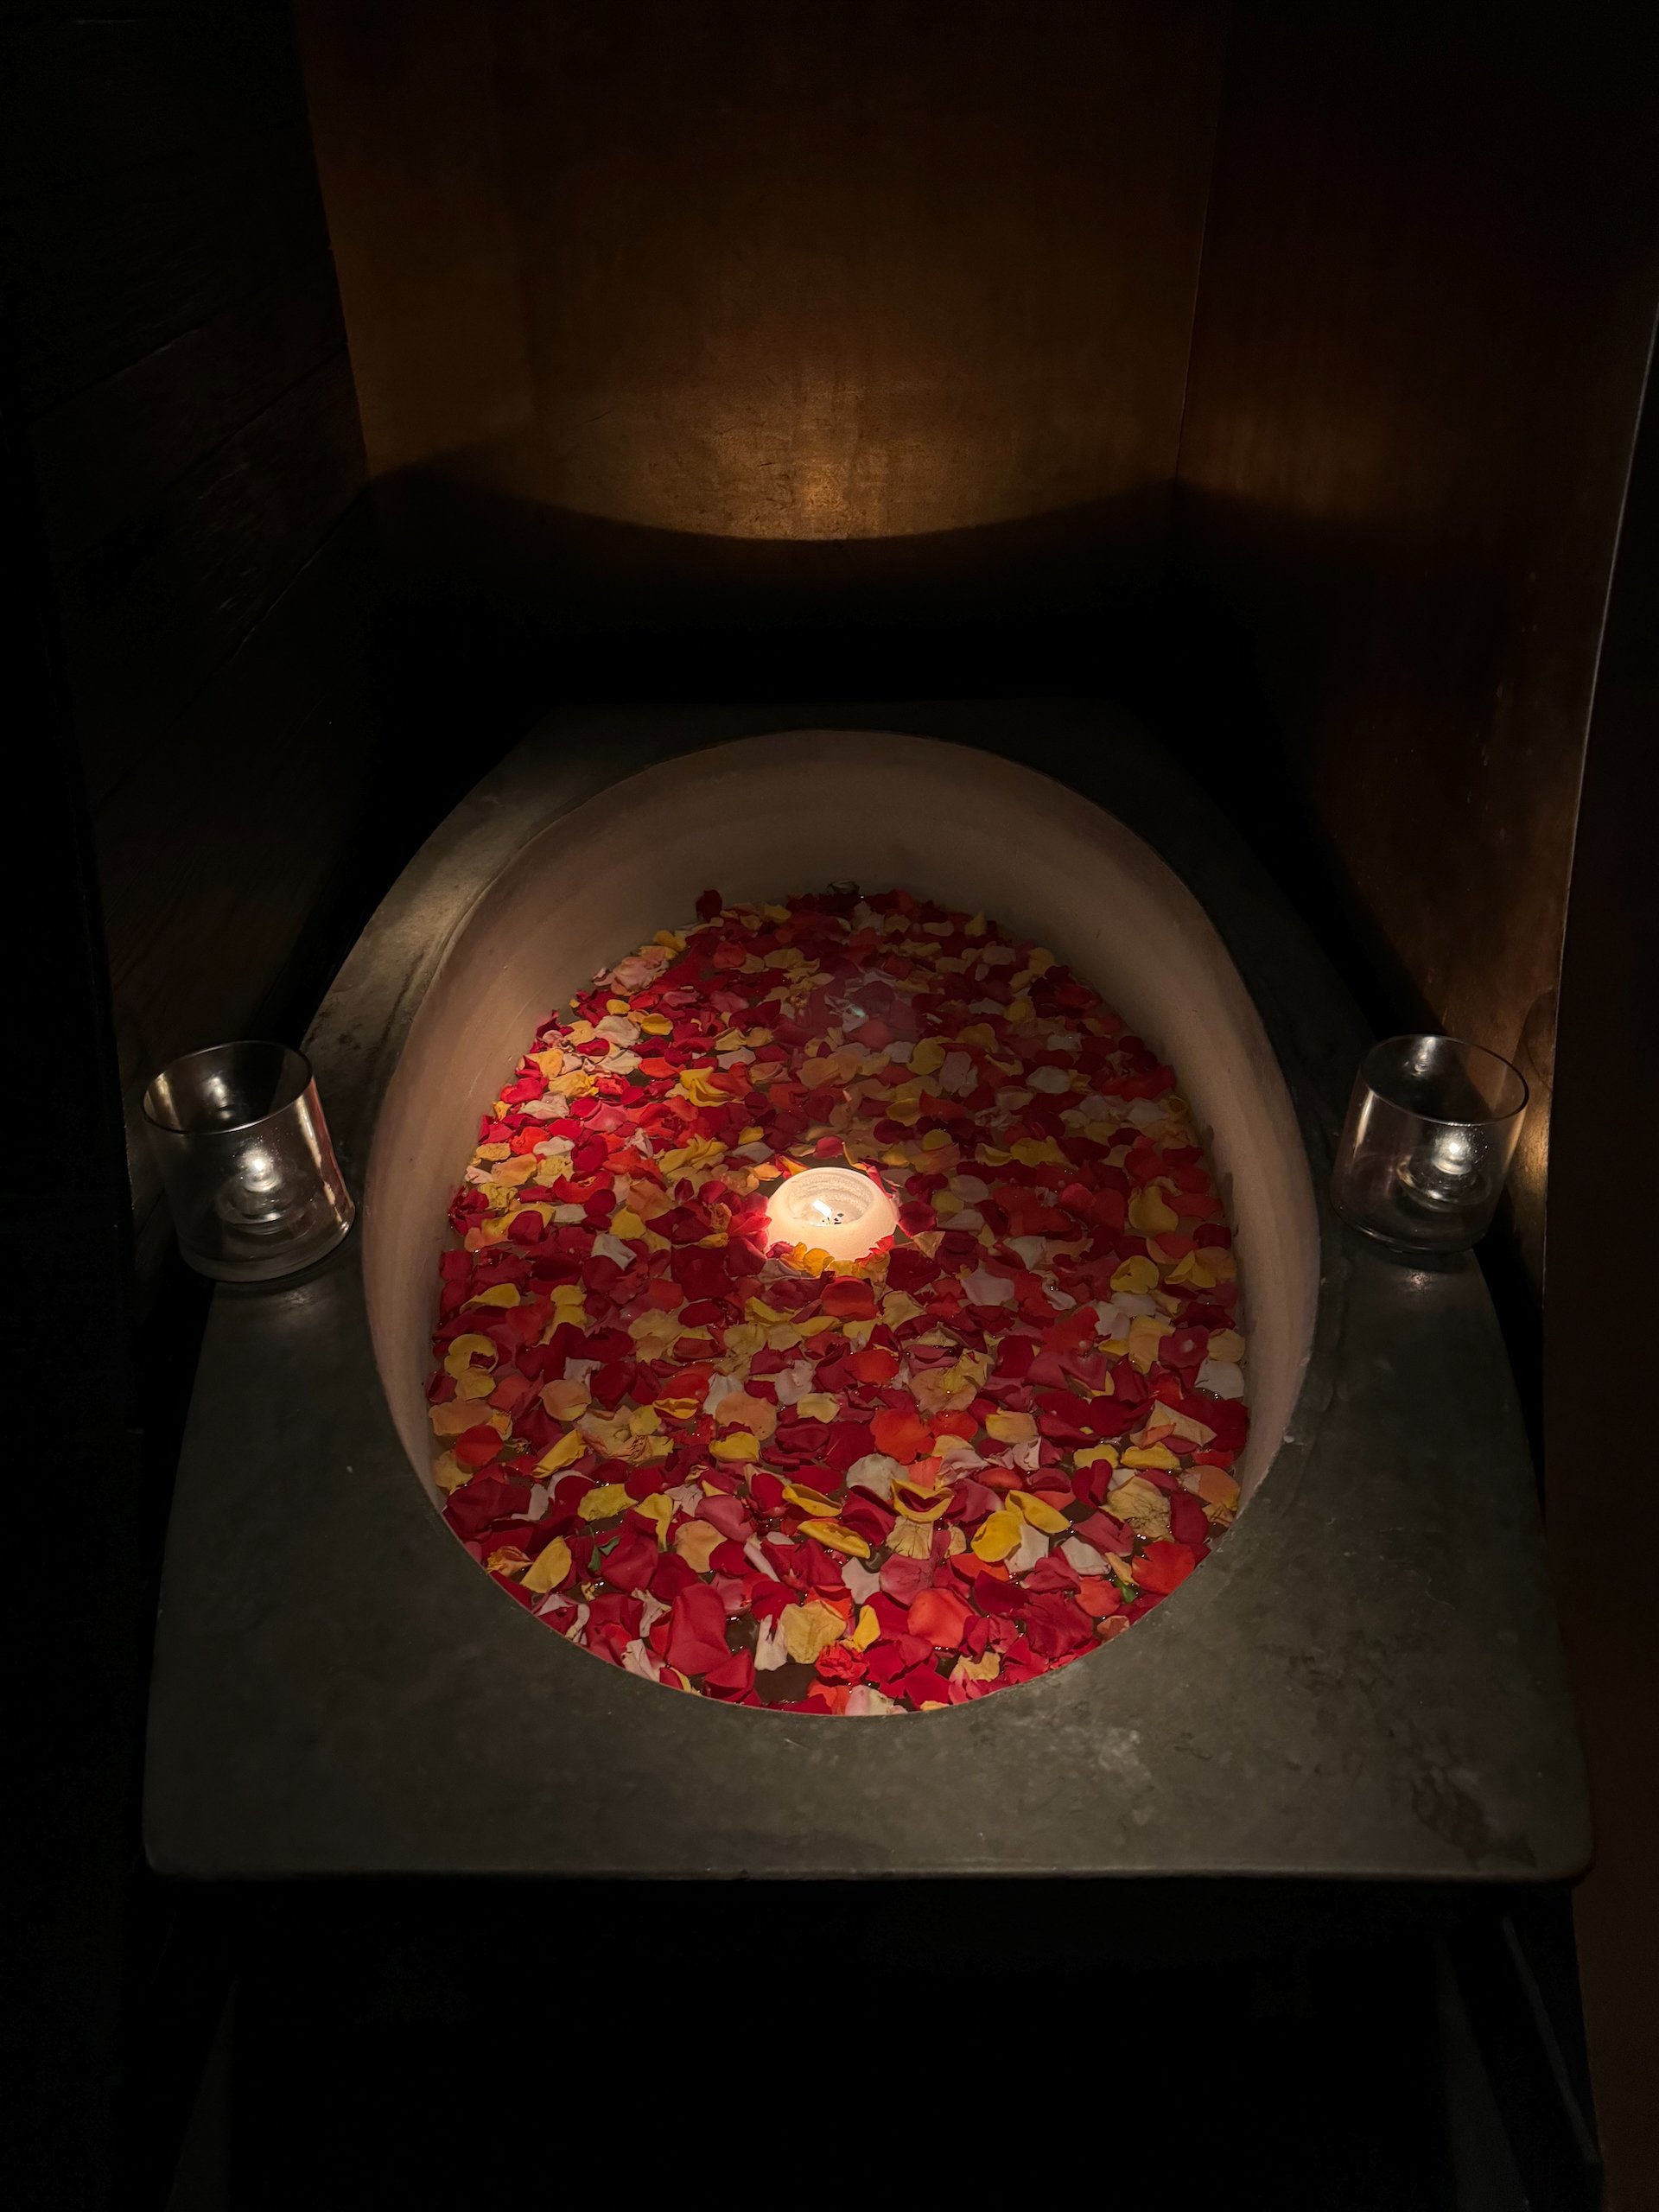  The entrance to Tao has these bathtubs that they fill with rose petals.  